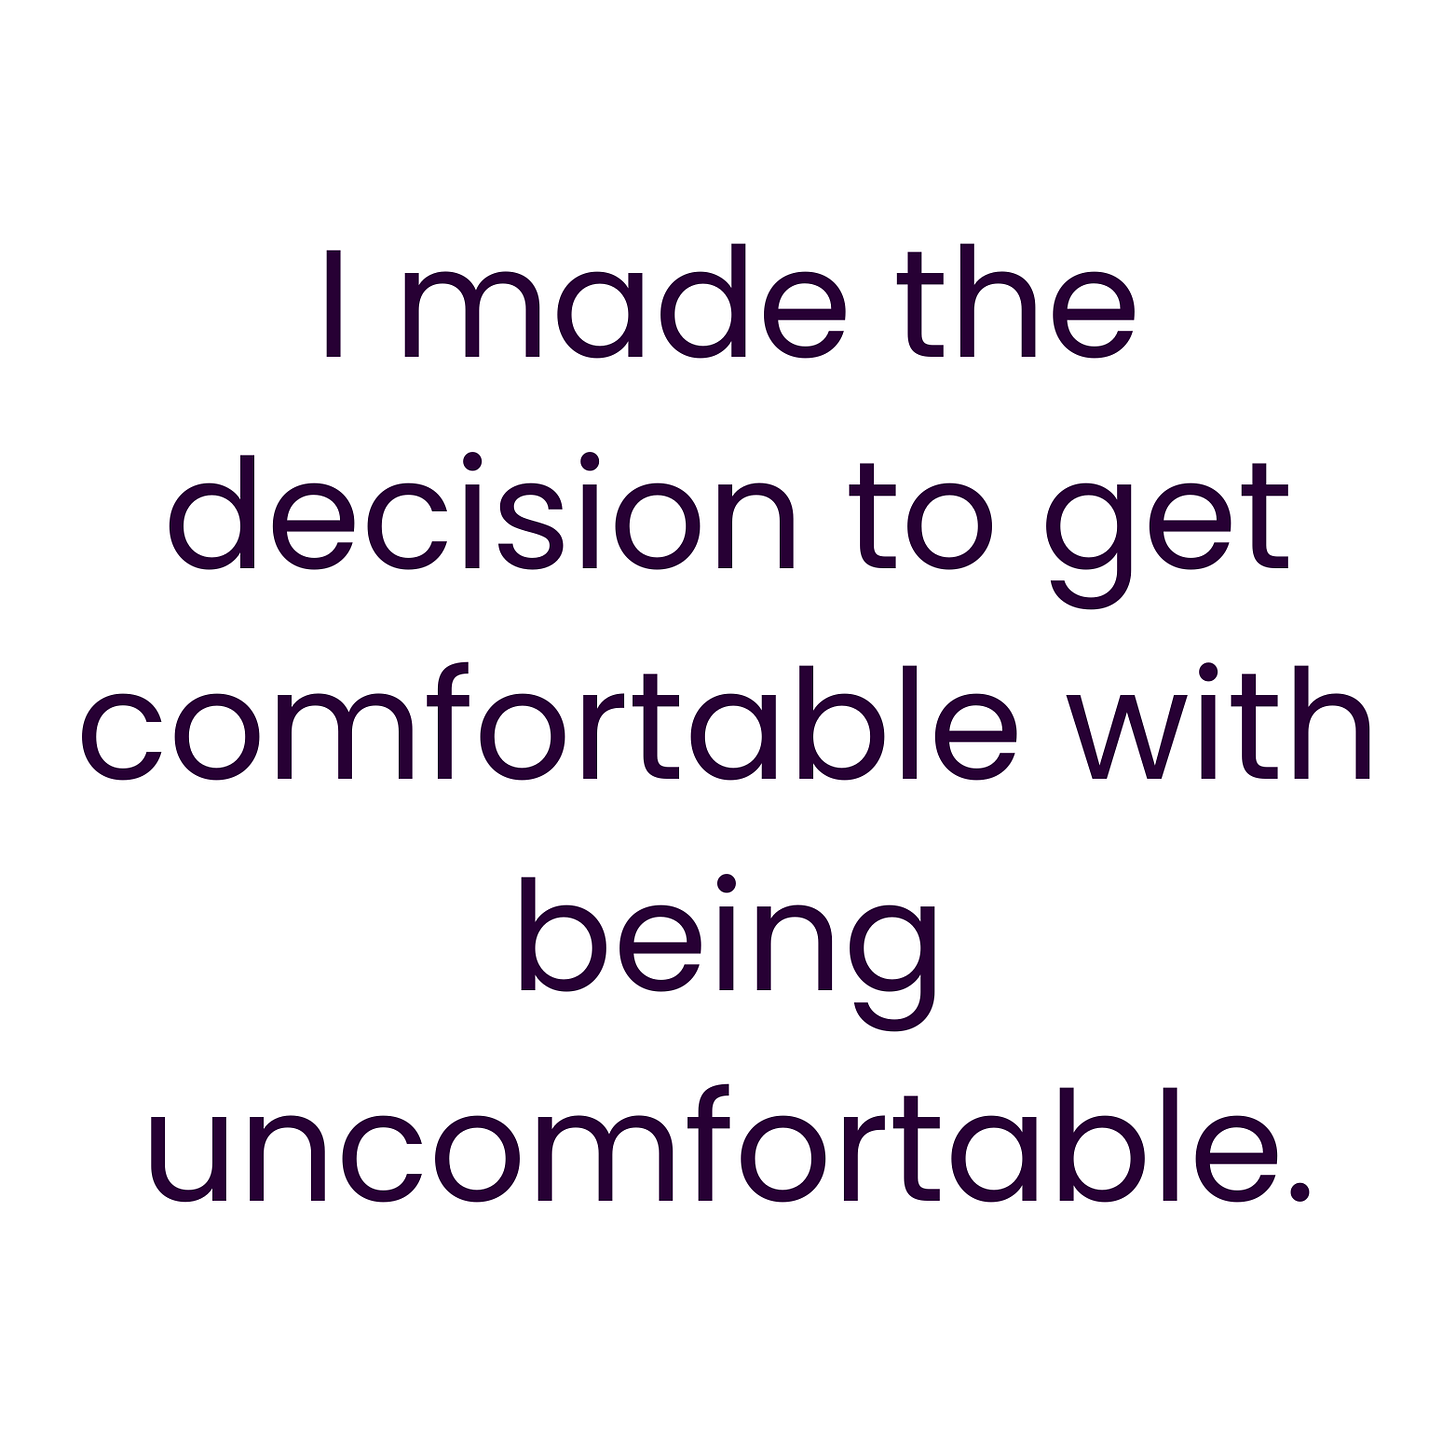 I made the decision to get cmfortable with being uncomfortable.